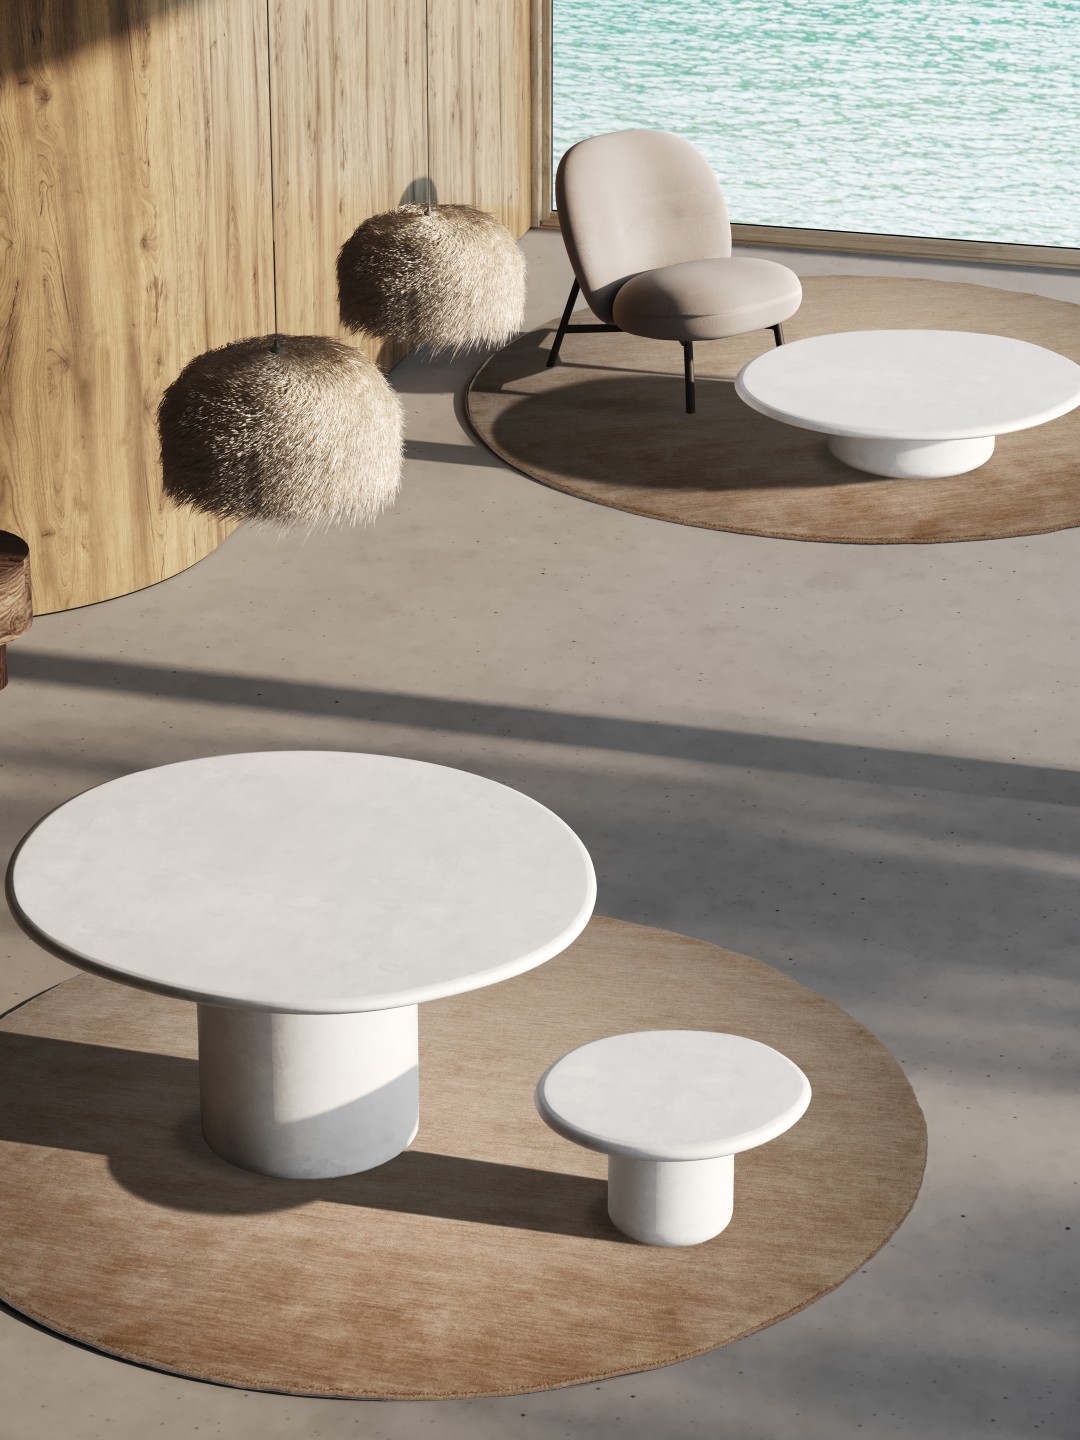 Usoo Collection Dining Table Coffee Table Salt Insitu White Tallira Furniture, for indoor/outdoor use by Muundo